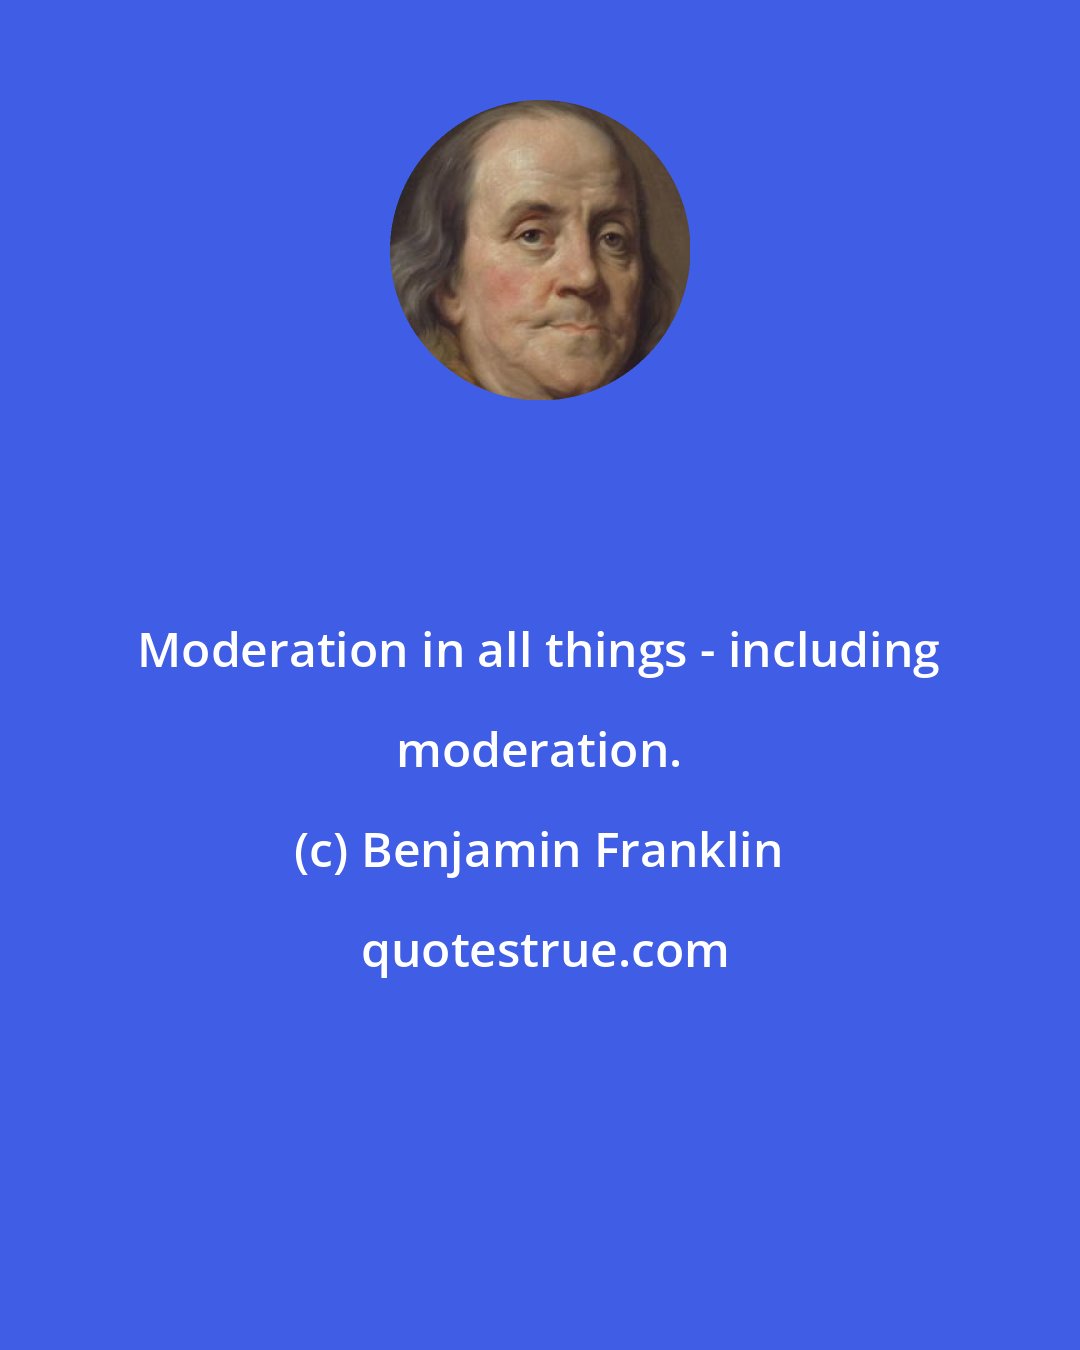 Benjamin Franklin: Moderation in all things - including moderation.